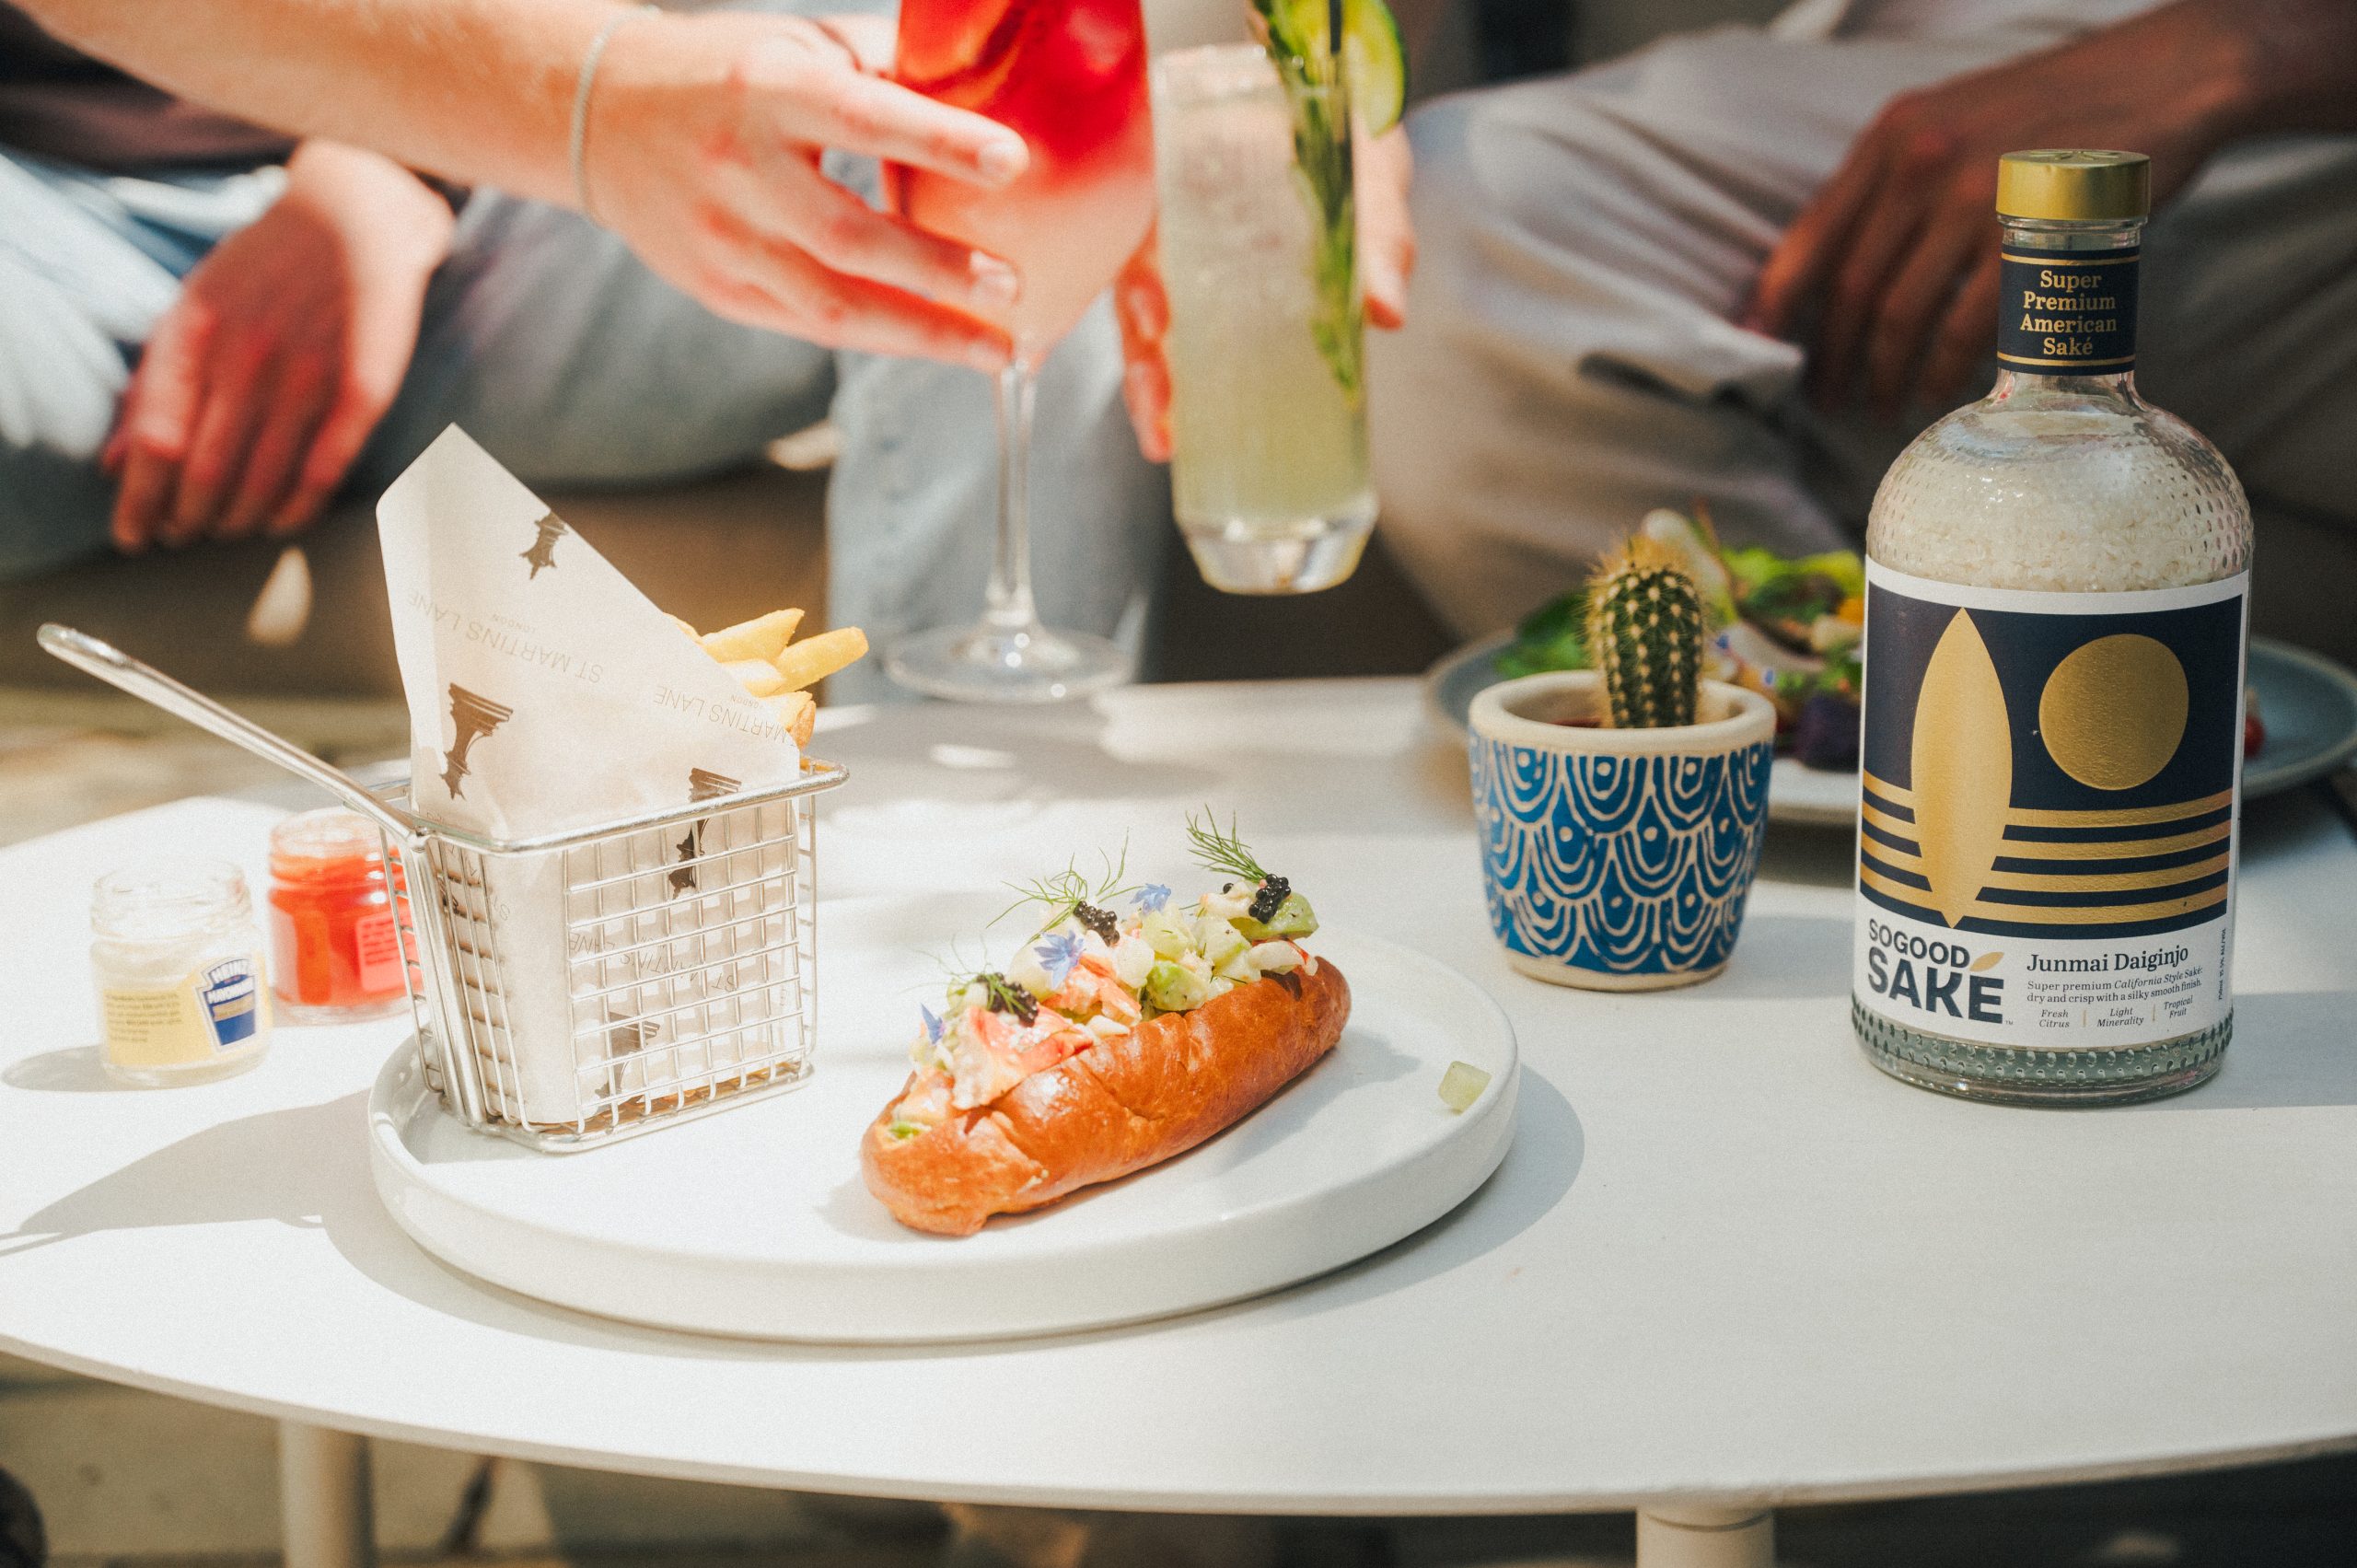 Image of a table and two people sat on a sofa in the background holding two cocktails. On the table there is a white plate with a lobster roll and fries, a bottle of SOGOOD SAKE and a small decorative cactus.